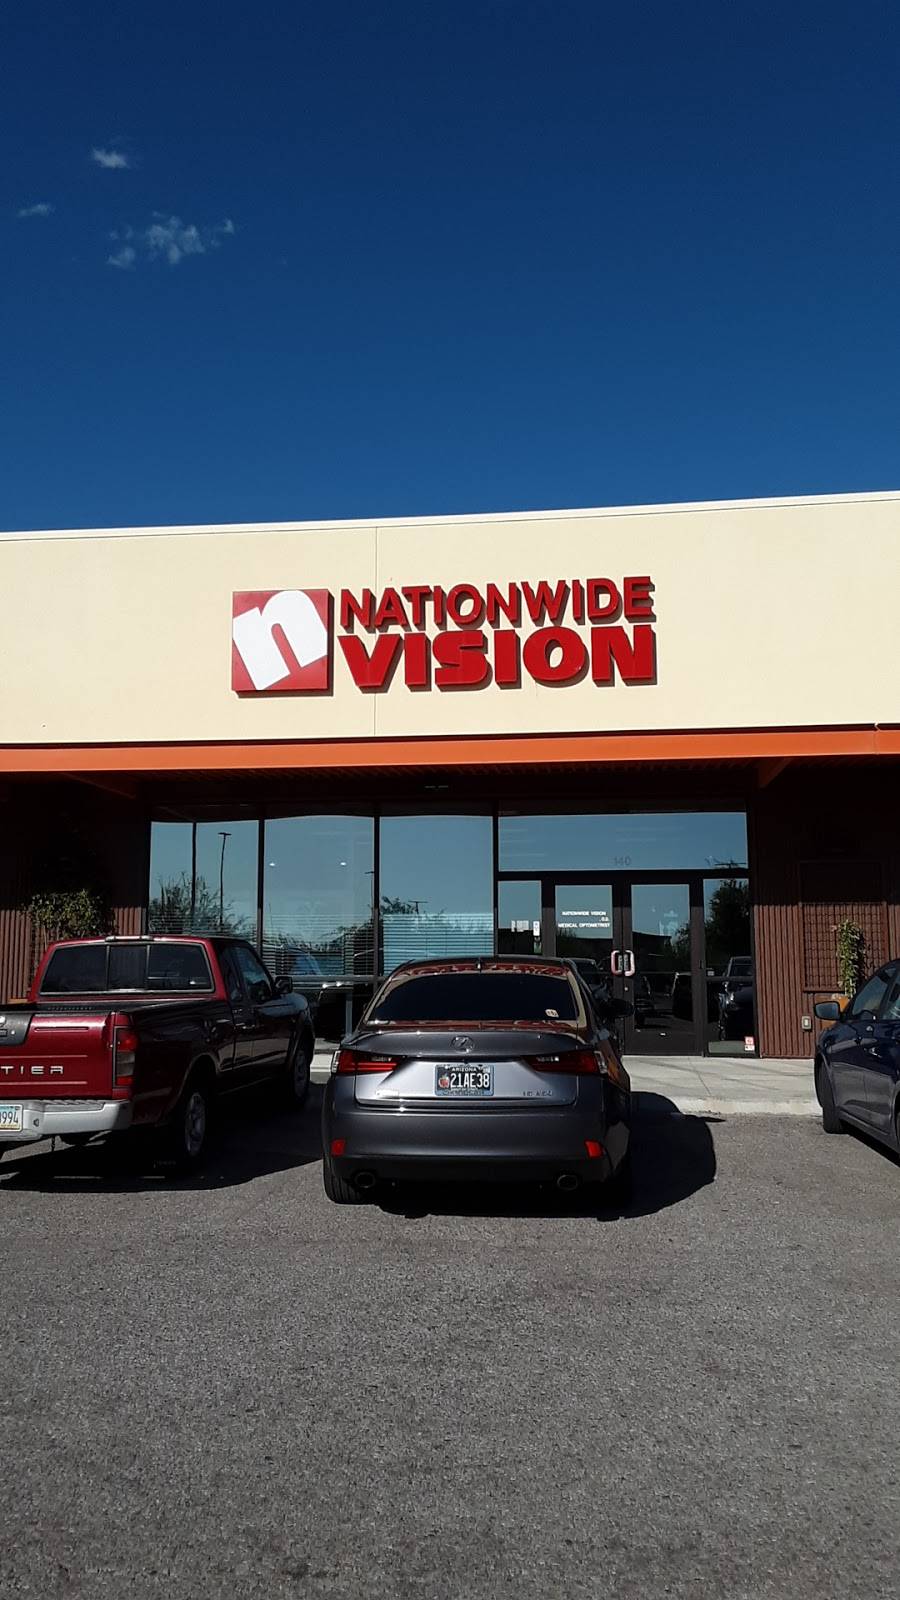 Nationwide Vision | 9160 S Houghton Rd Suite 140, Tucson, AZ 85747, USA | Phone: (520) 574-6513